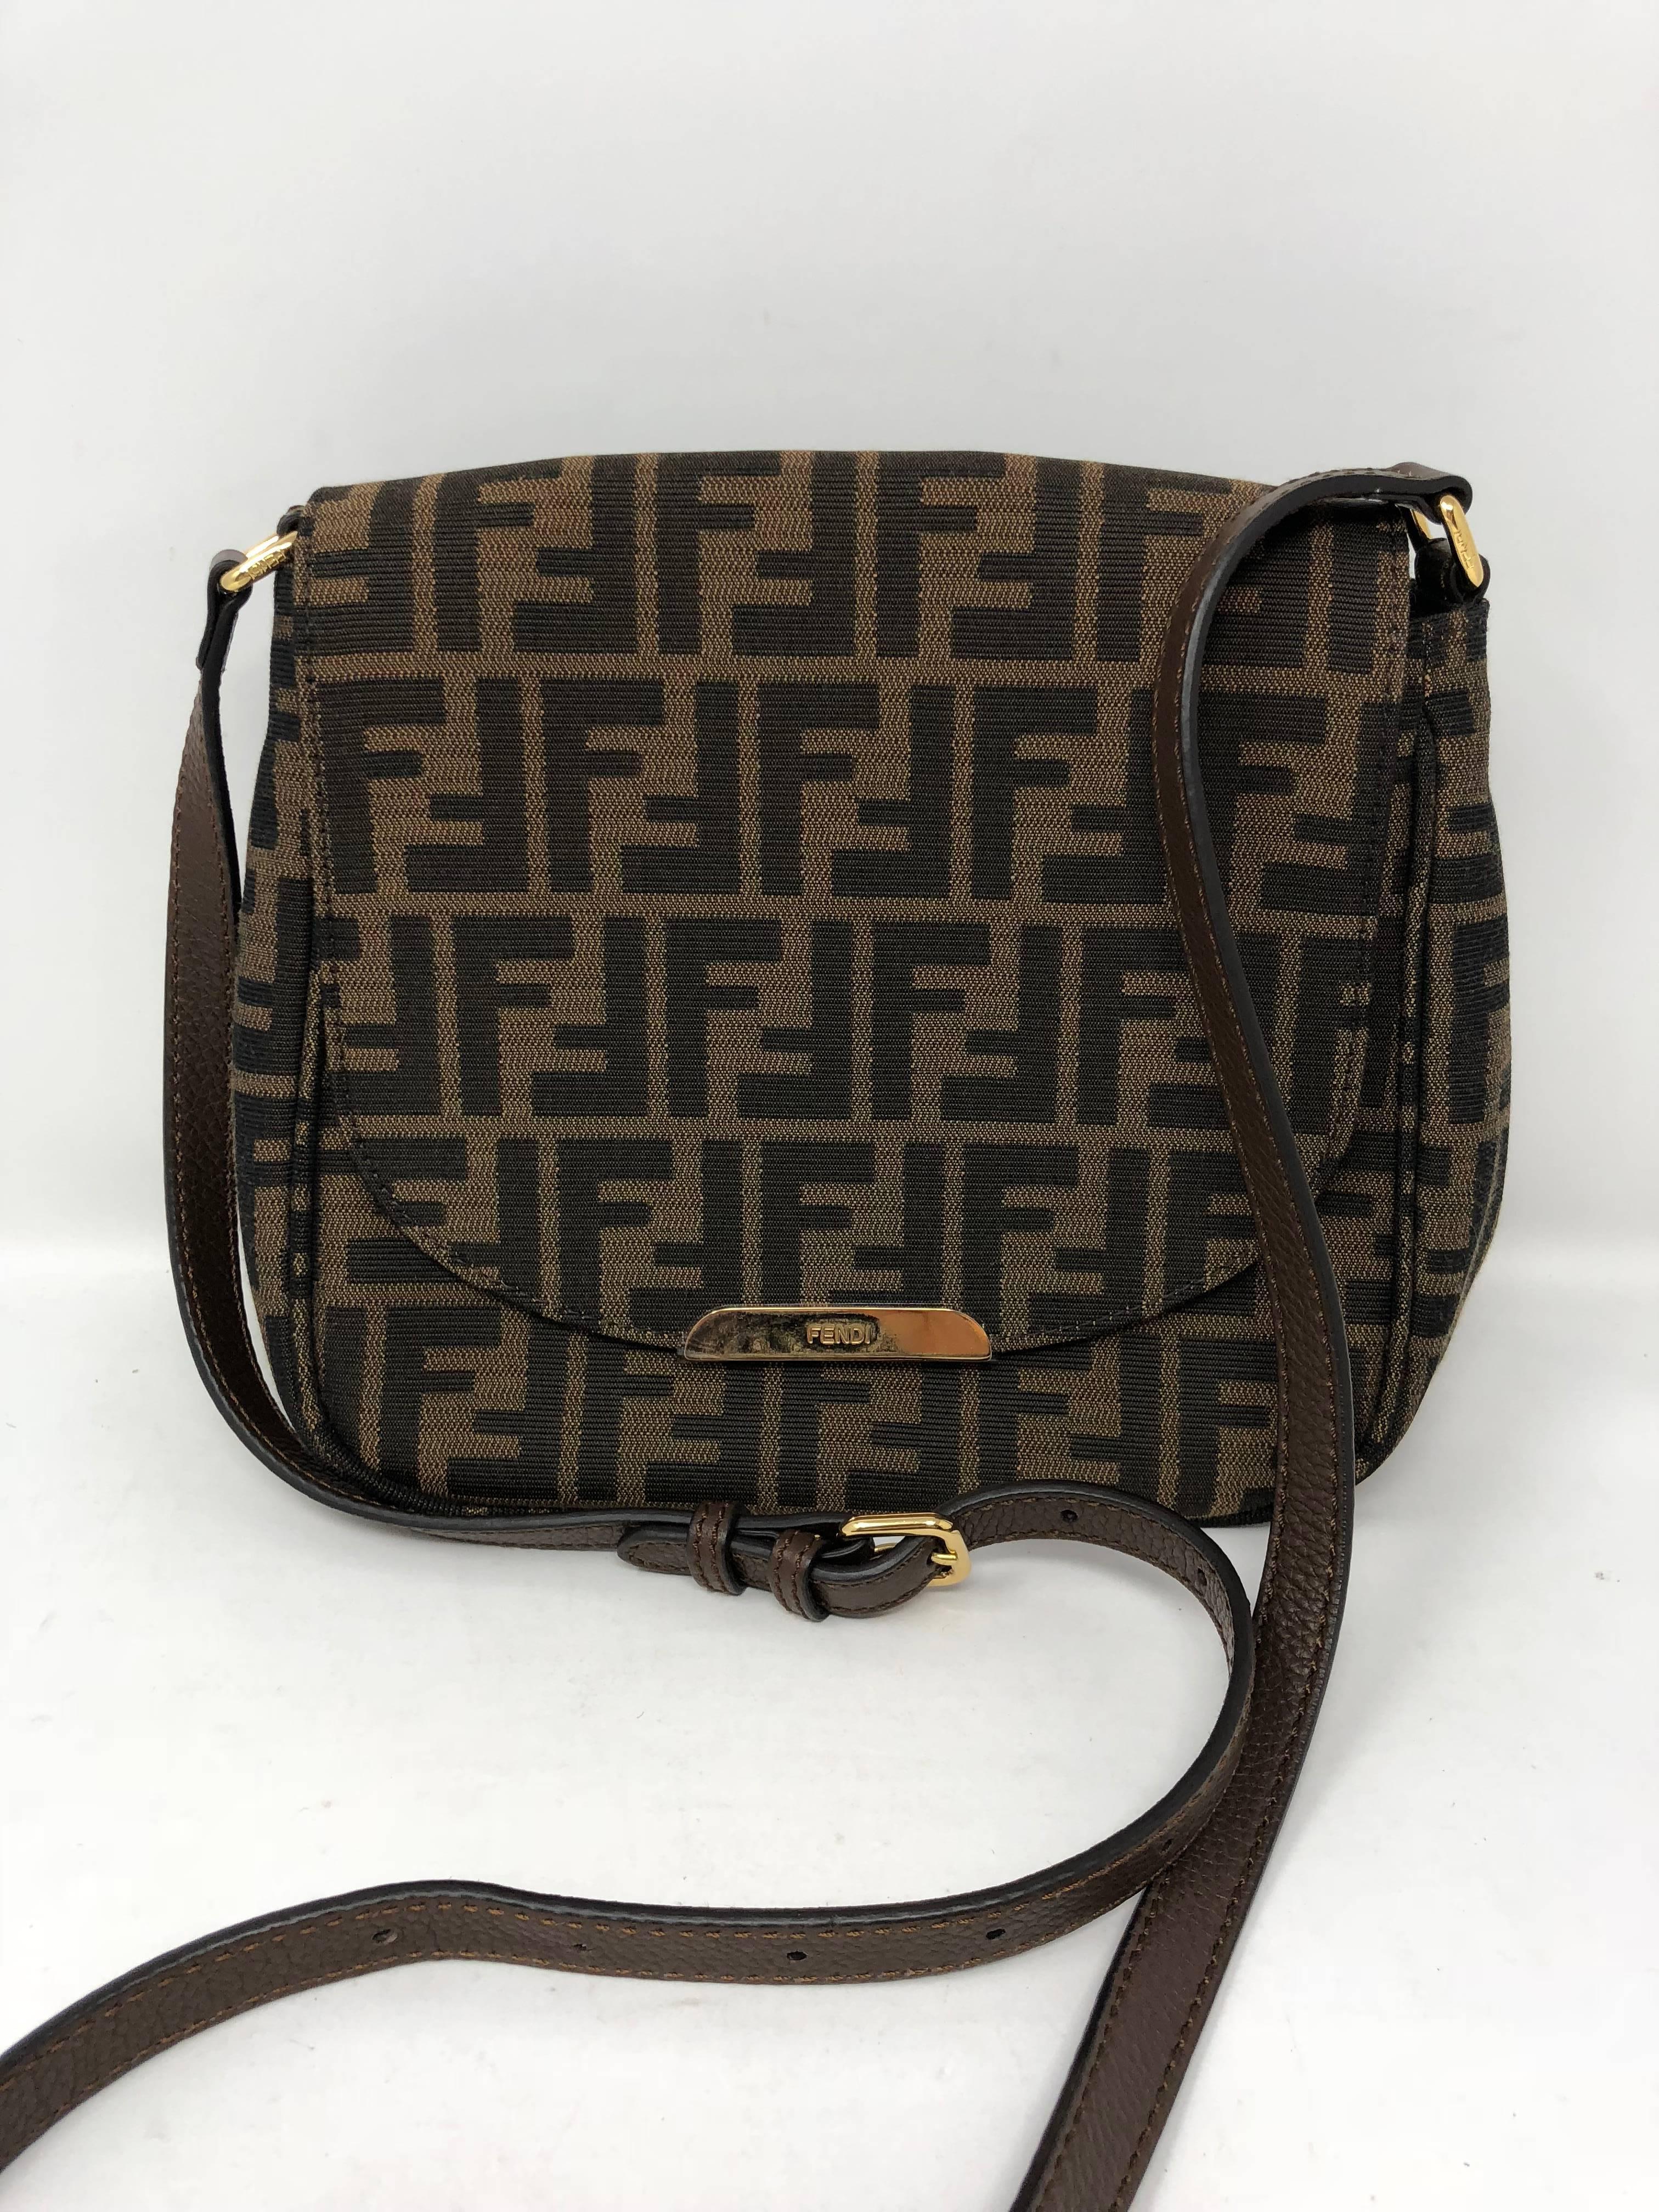 Brand new condition Fendi Crossbody bag. In traditional Fendi classic monogram print on cloth with leather handle straps. Gold hardware and accents. Zucca-print small crossbody bag with adjustable strap. Never used and plastic still on hardware. 